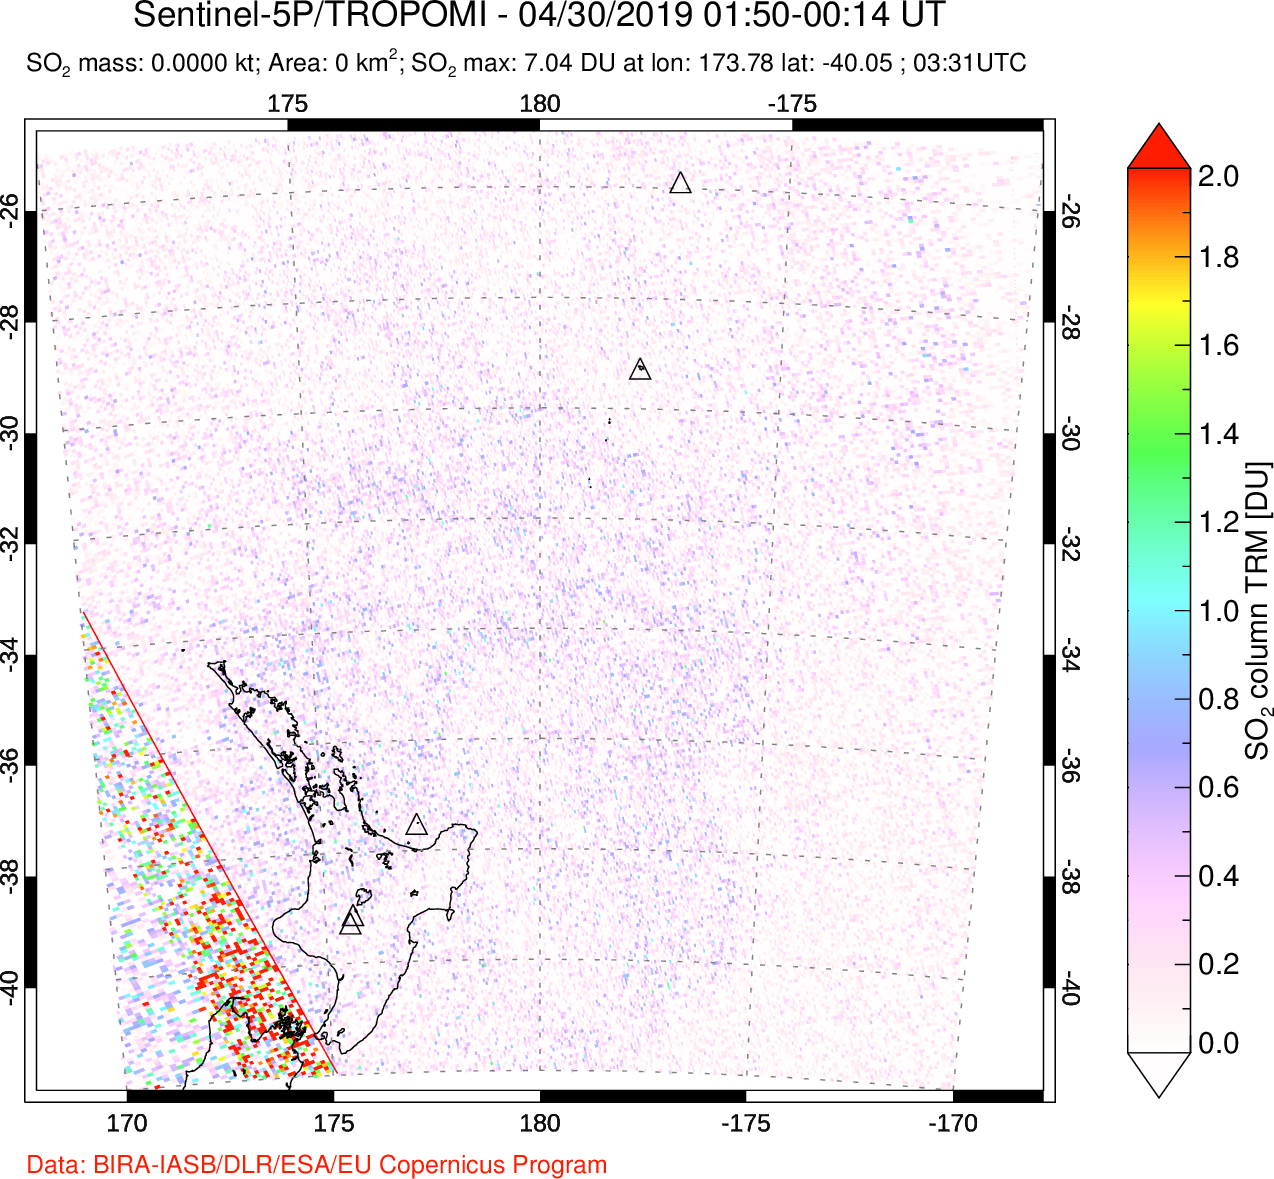 A sulfur dioxide image over New Zealand on Apr 30, 2019.